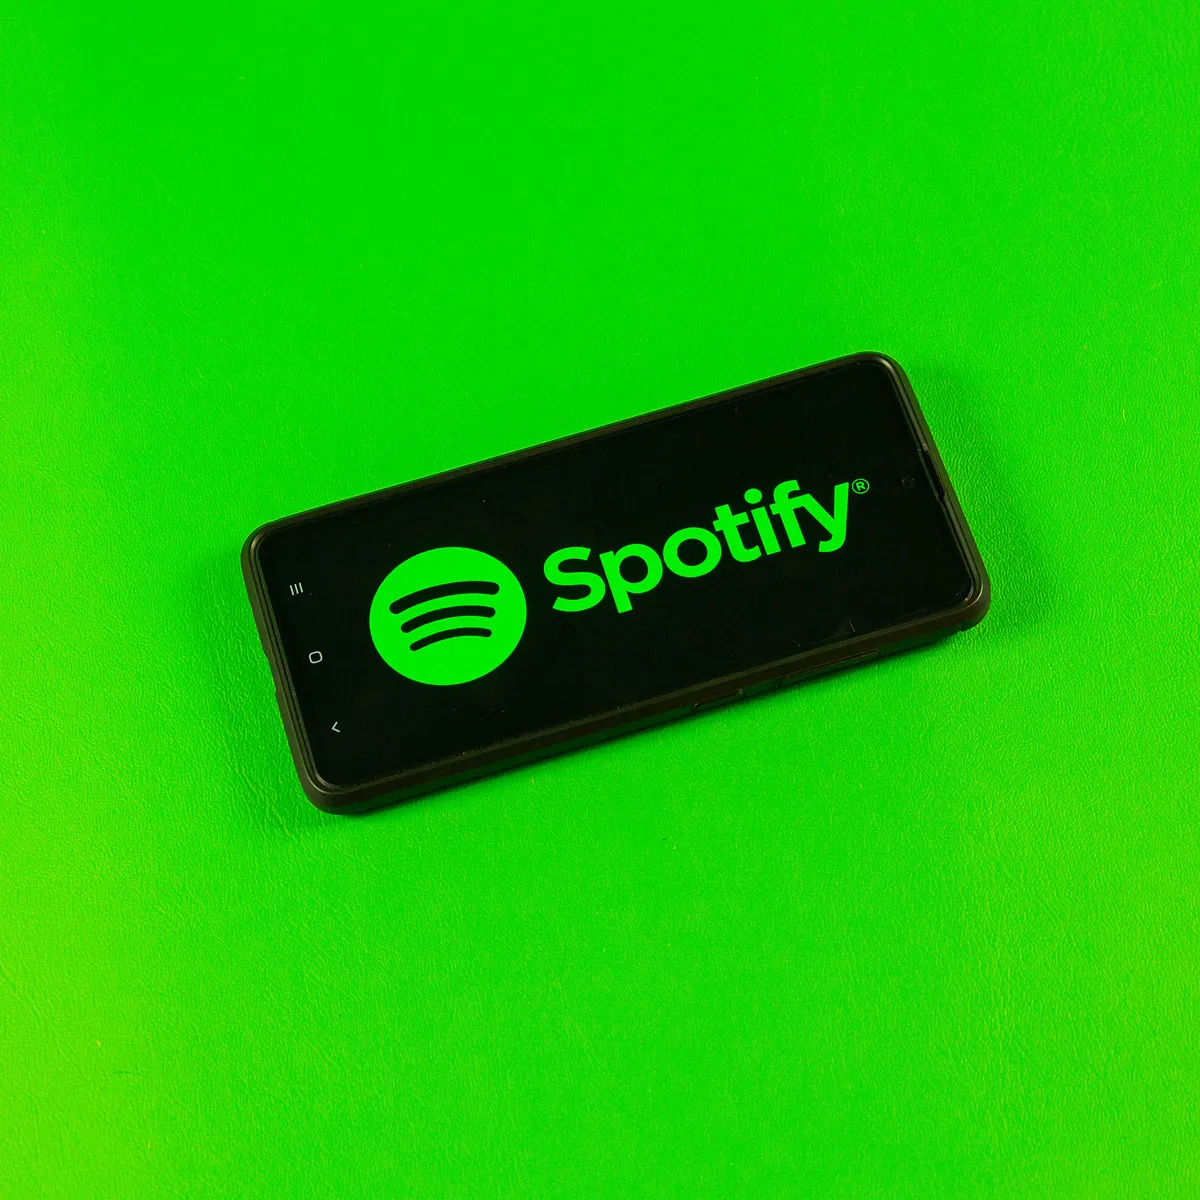 Spotify Set to Enhance Audio Experience with HiFi Feature